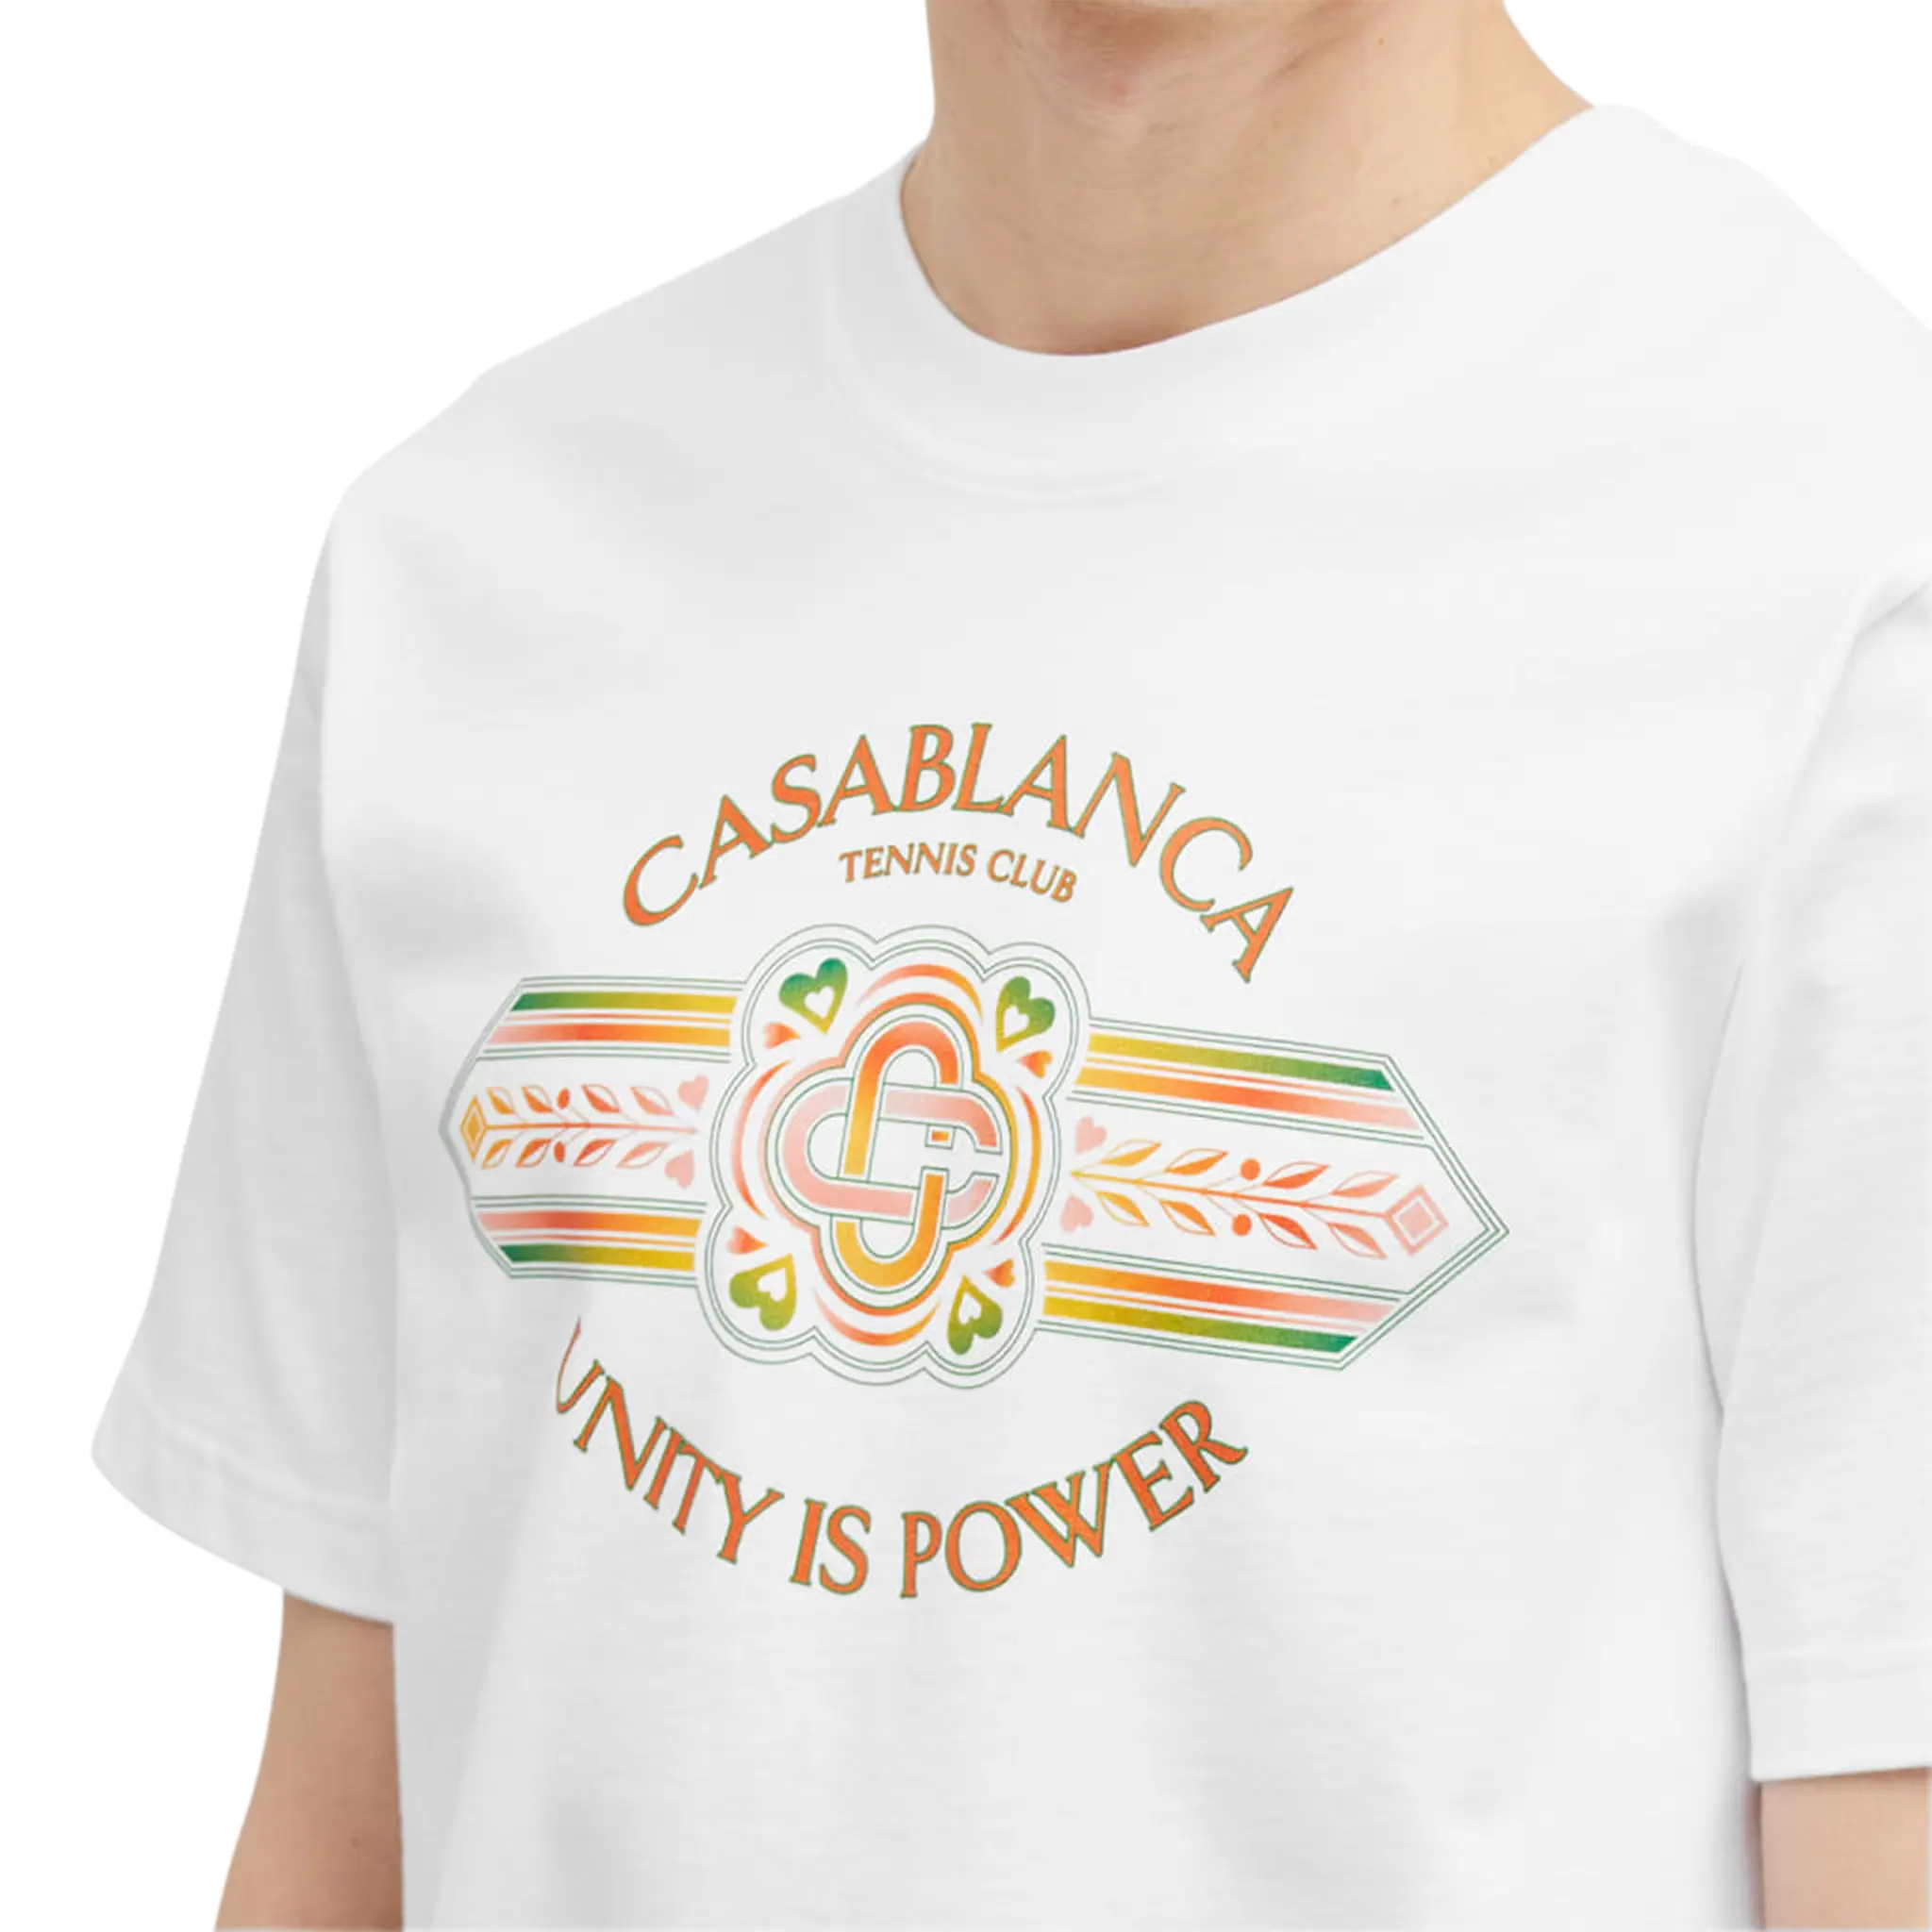 Detail view of Casablanca Unity Is Power White T Shirt MS24-JTS-001-12